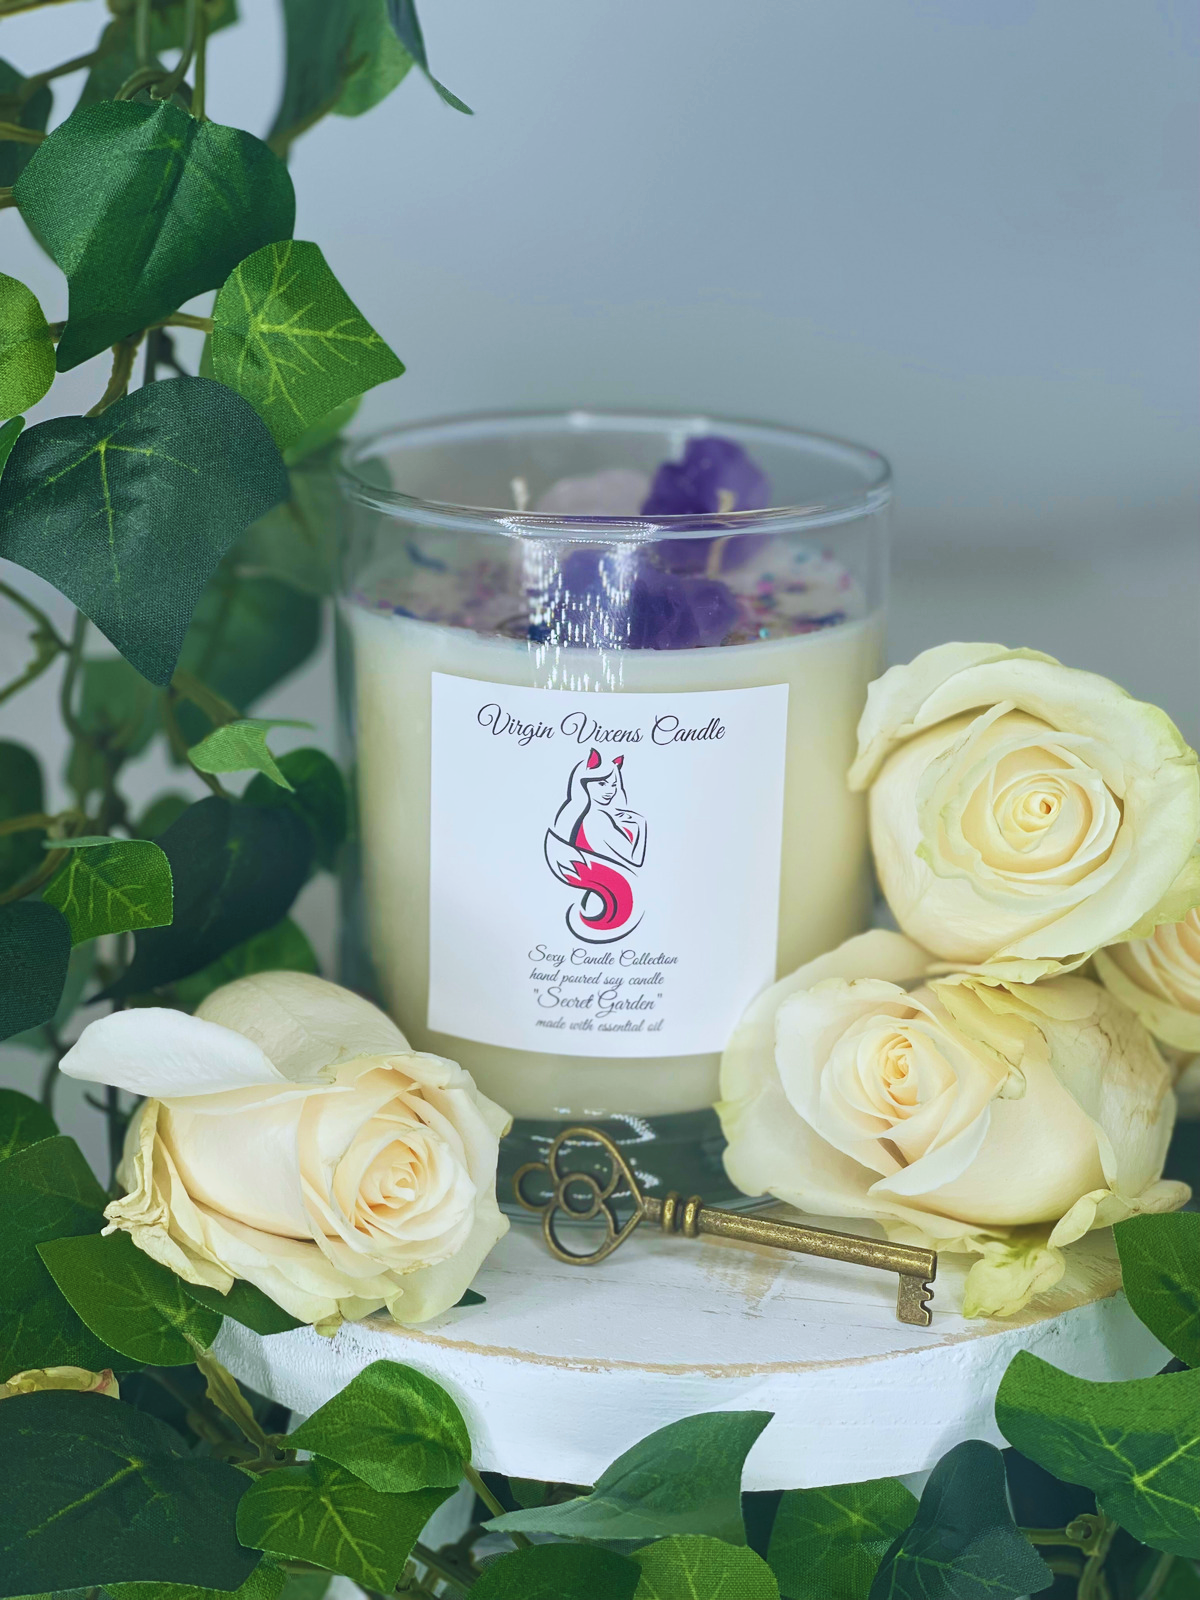 Explore the Enchanting Fragrance of "Secret Garden" Scented Candle